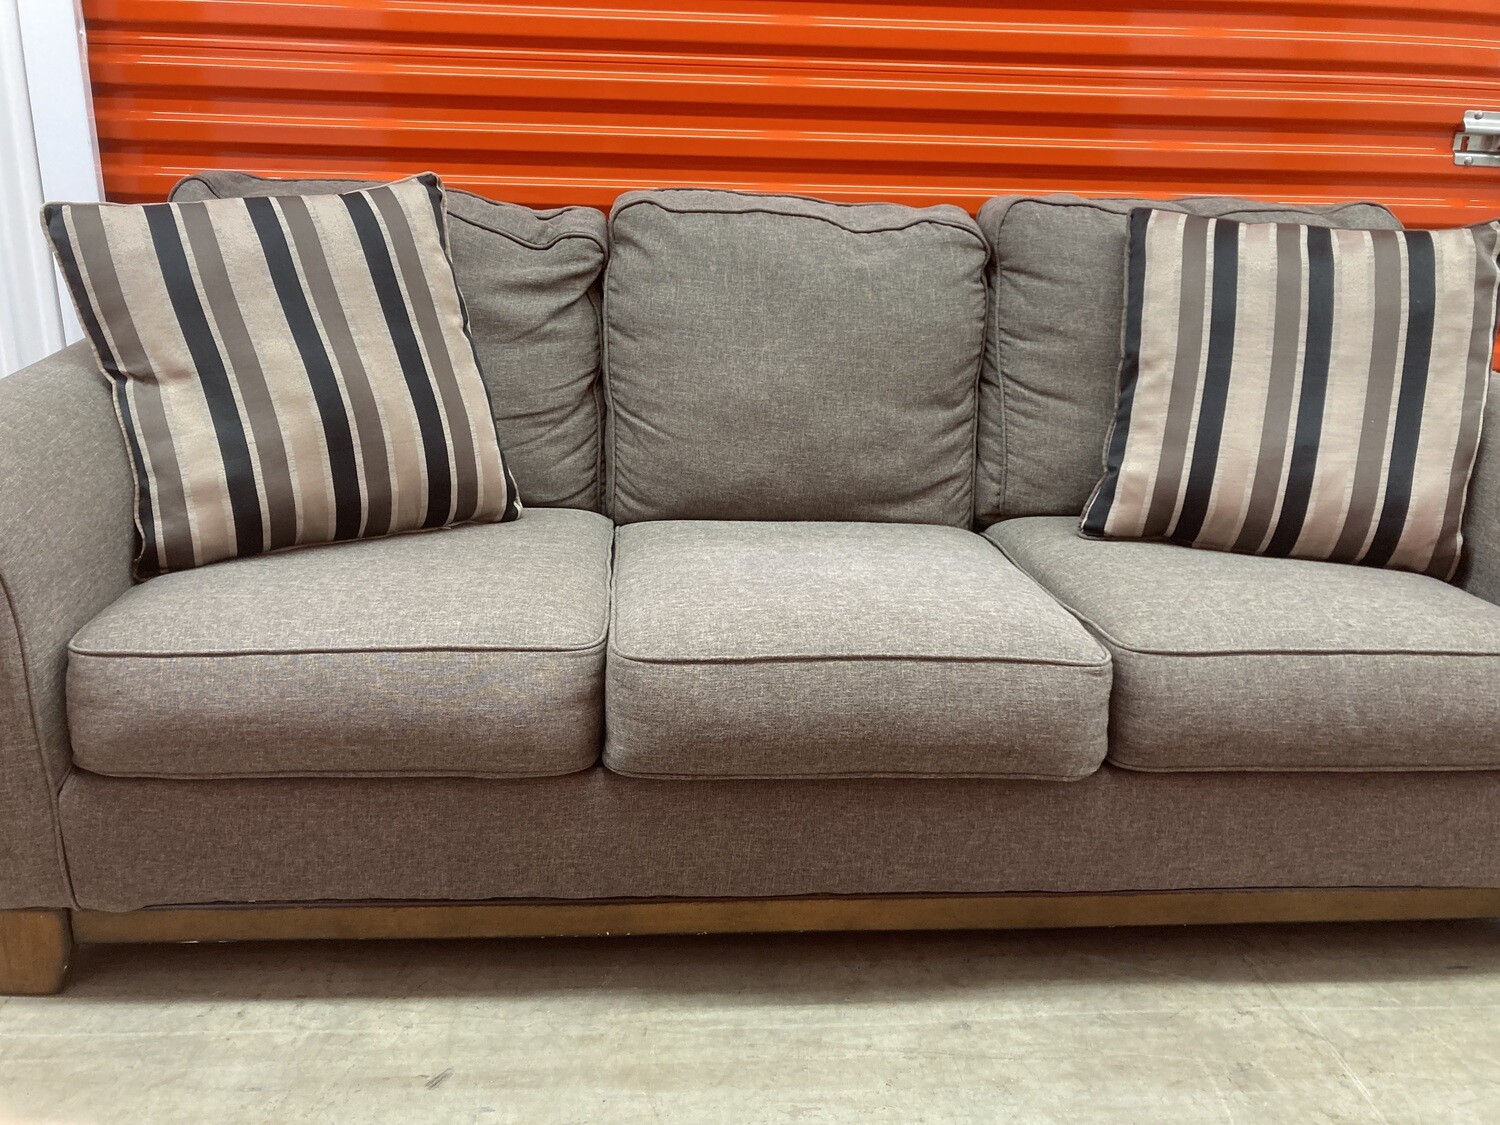 Ashley Furn. Sofa, Taupe - beautiful! #2322 - 2 MOS. TO SELL, 50% off